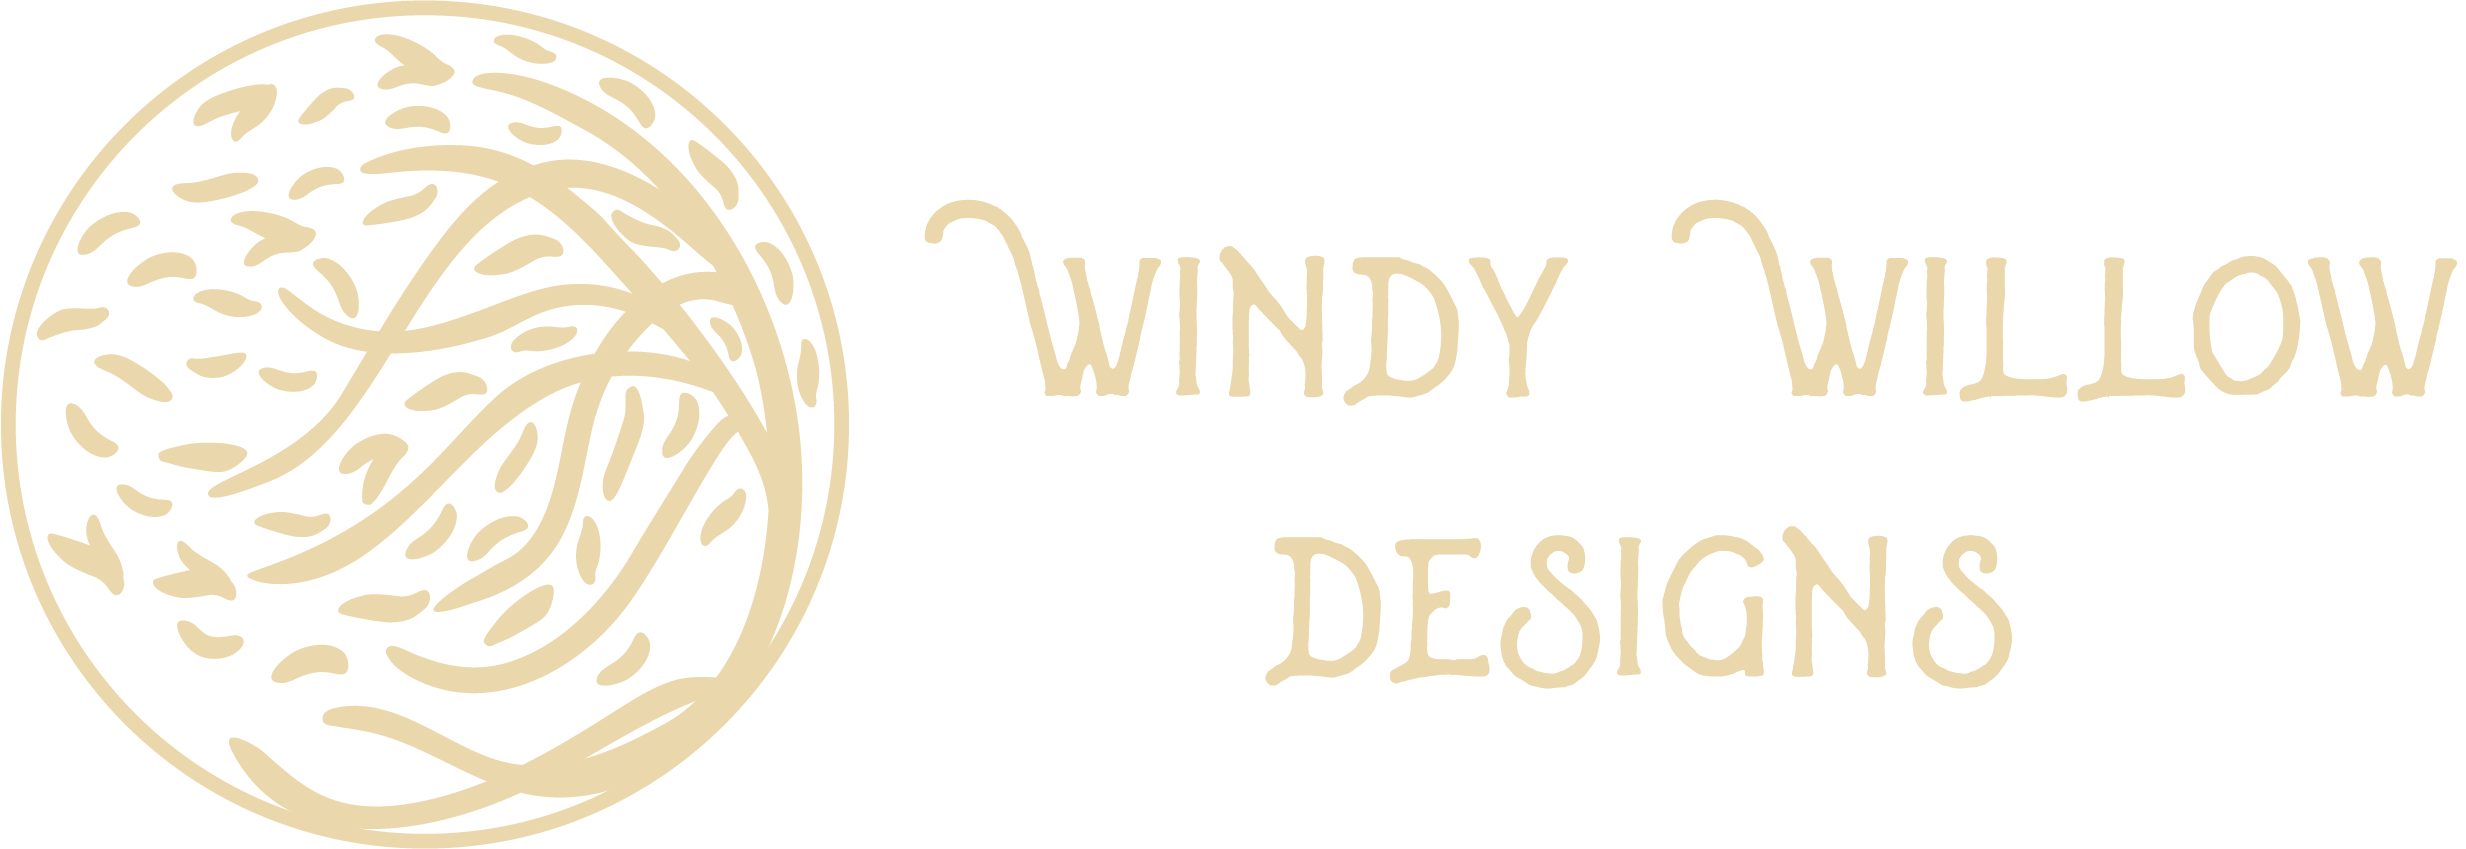 Windy Willow Designs